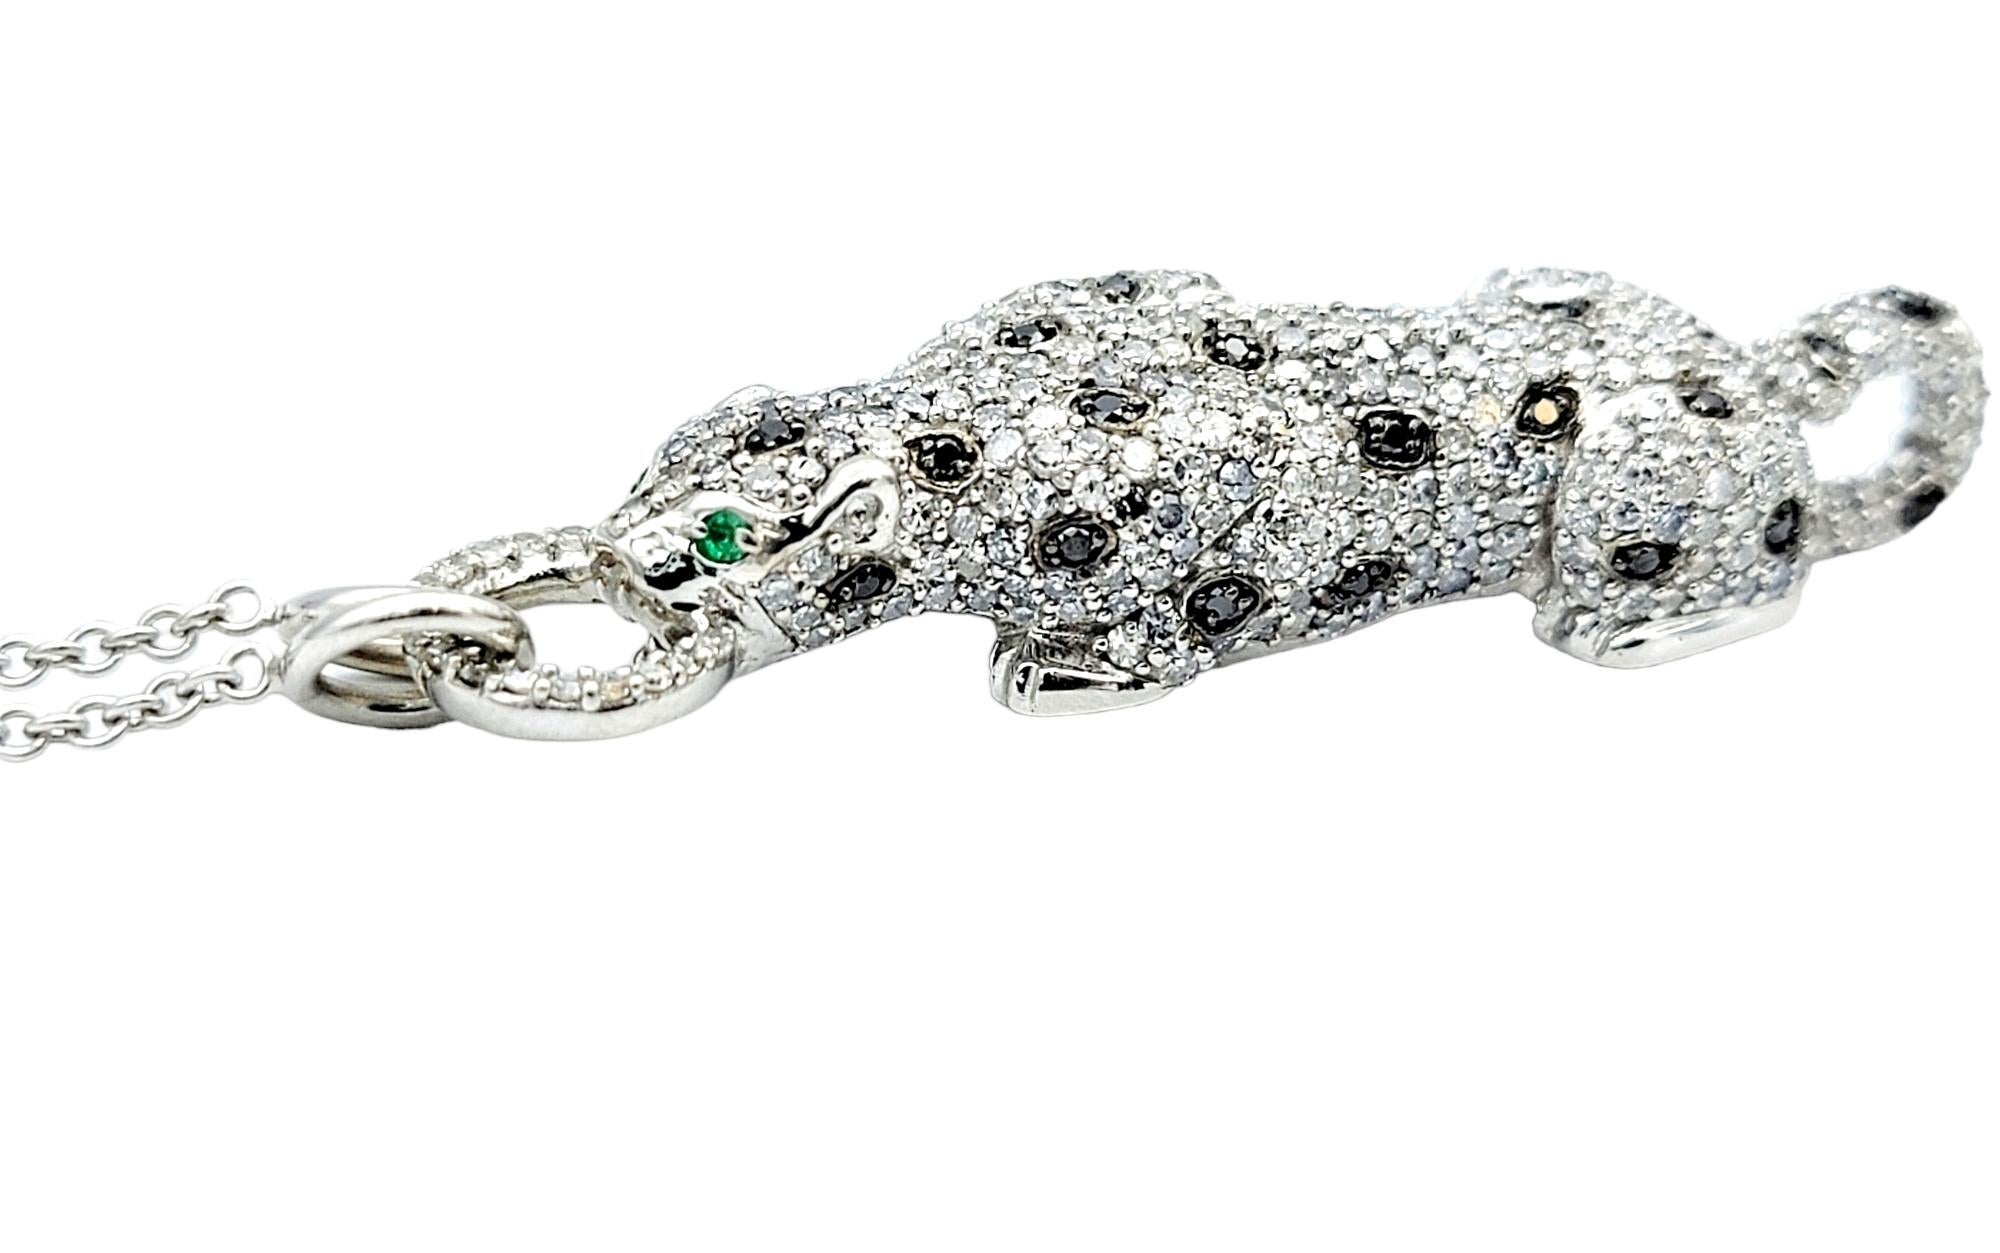 This pave diamond panther pendant necklace by Effy exudes an exquisite blend of elegance and fierceness. Crafted in polished 14 karat white gold, this remarkable jewelry piece showcases a stunning panther pendant, a symbol of strength and